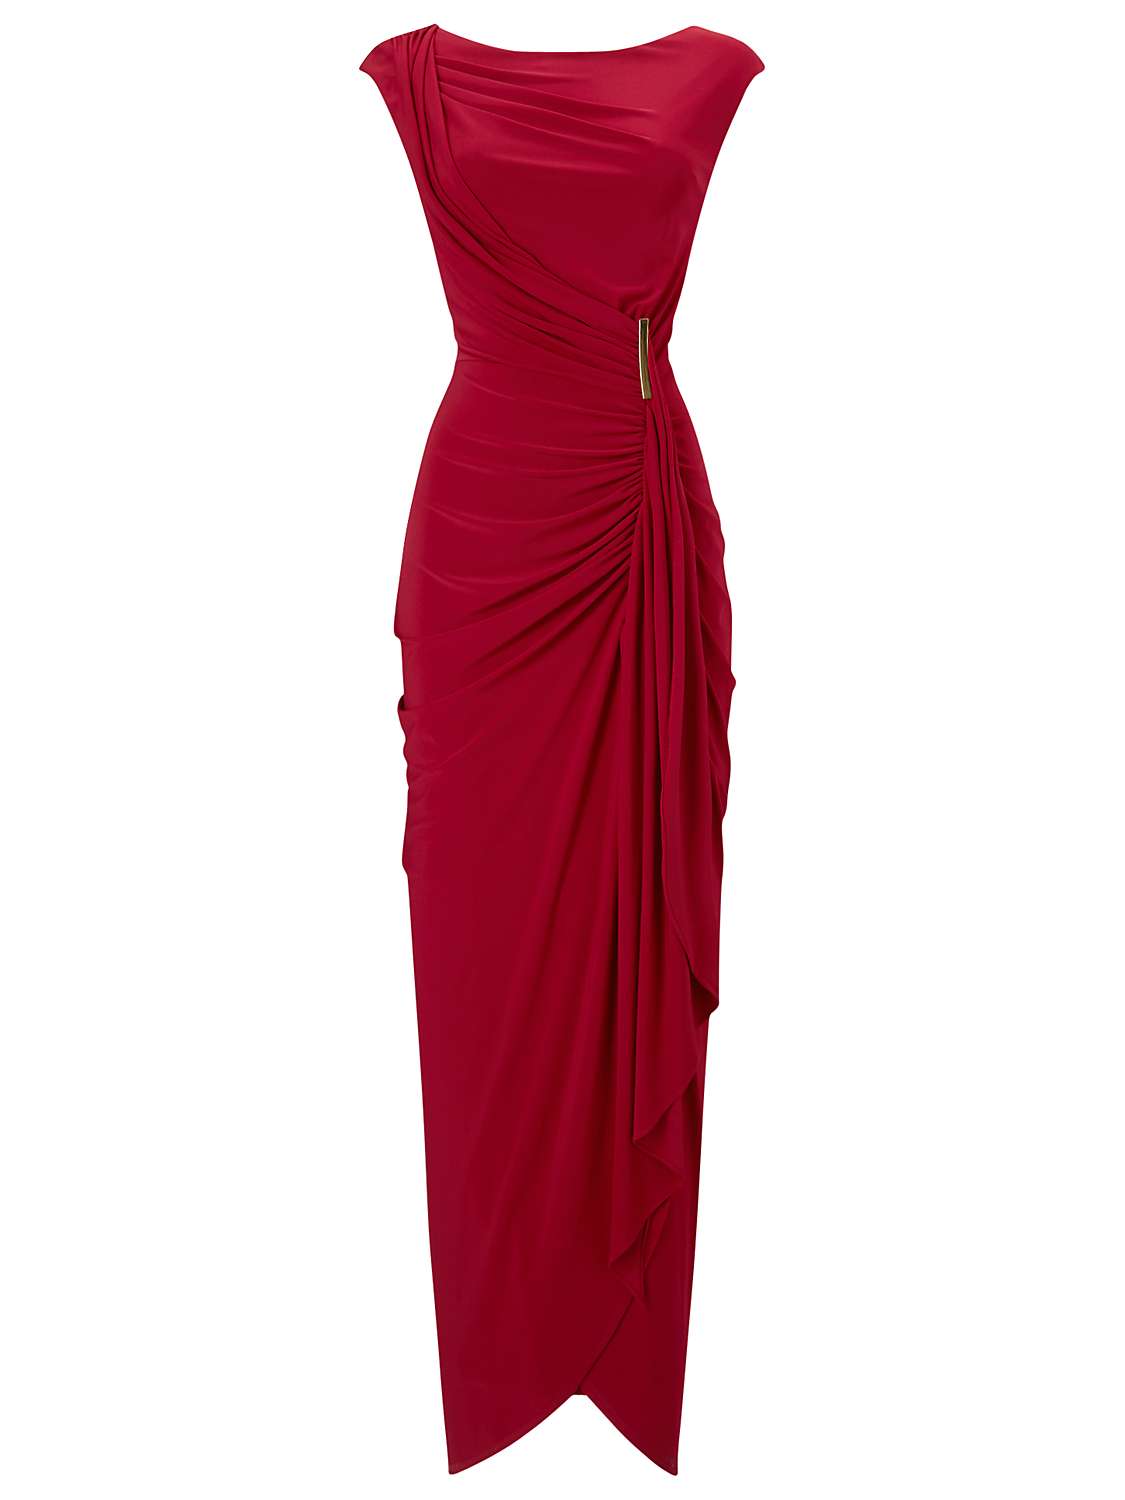 Phase Eight Donna Dress, Scarlet at John Lewis & Partners